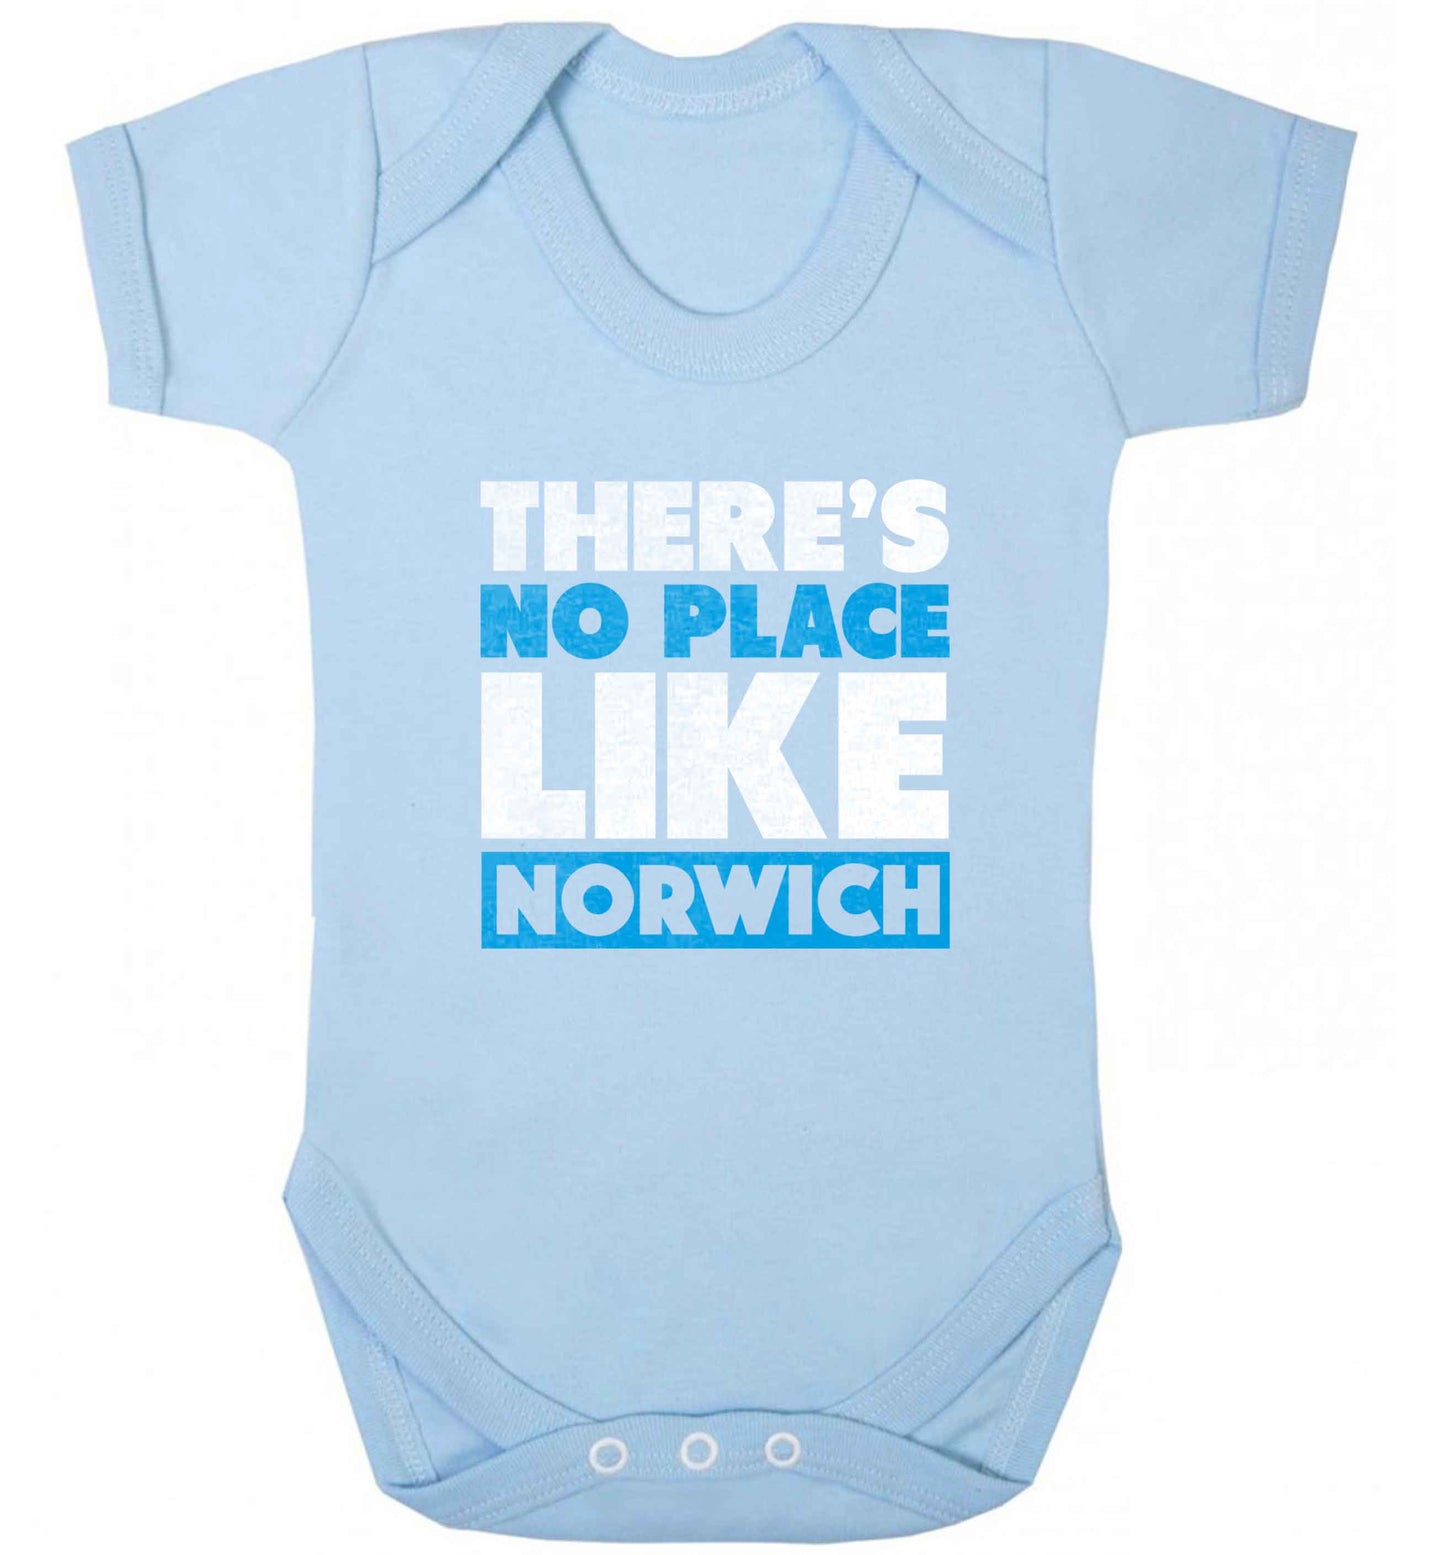 There's no place like Norwich baby vest pale blue 18-24 months